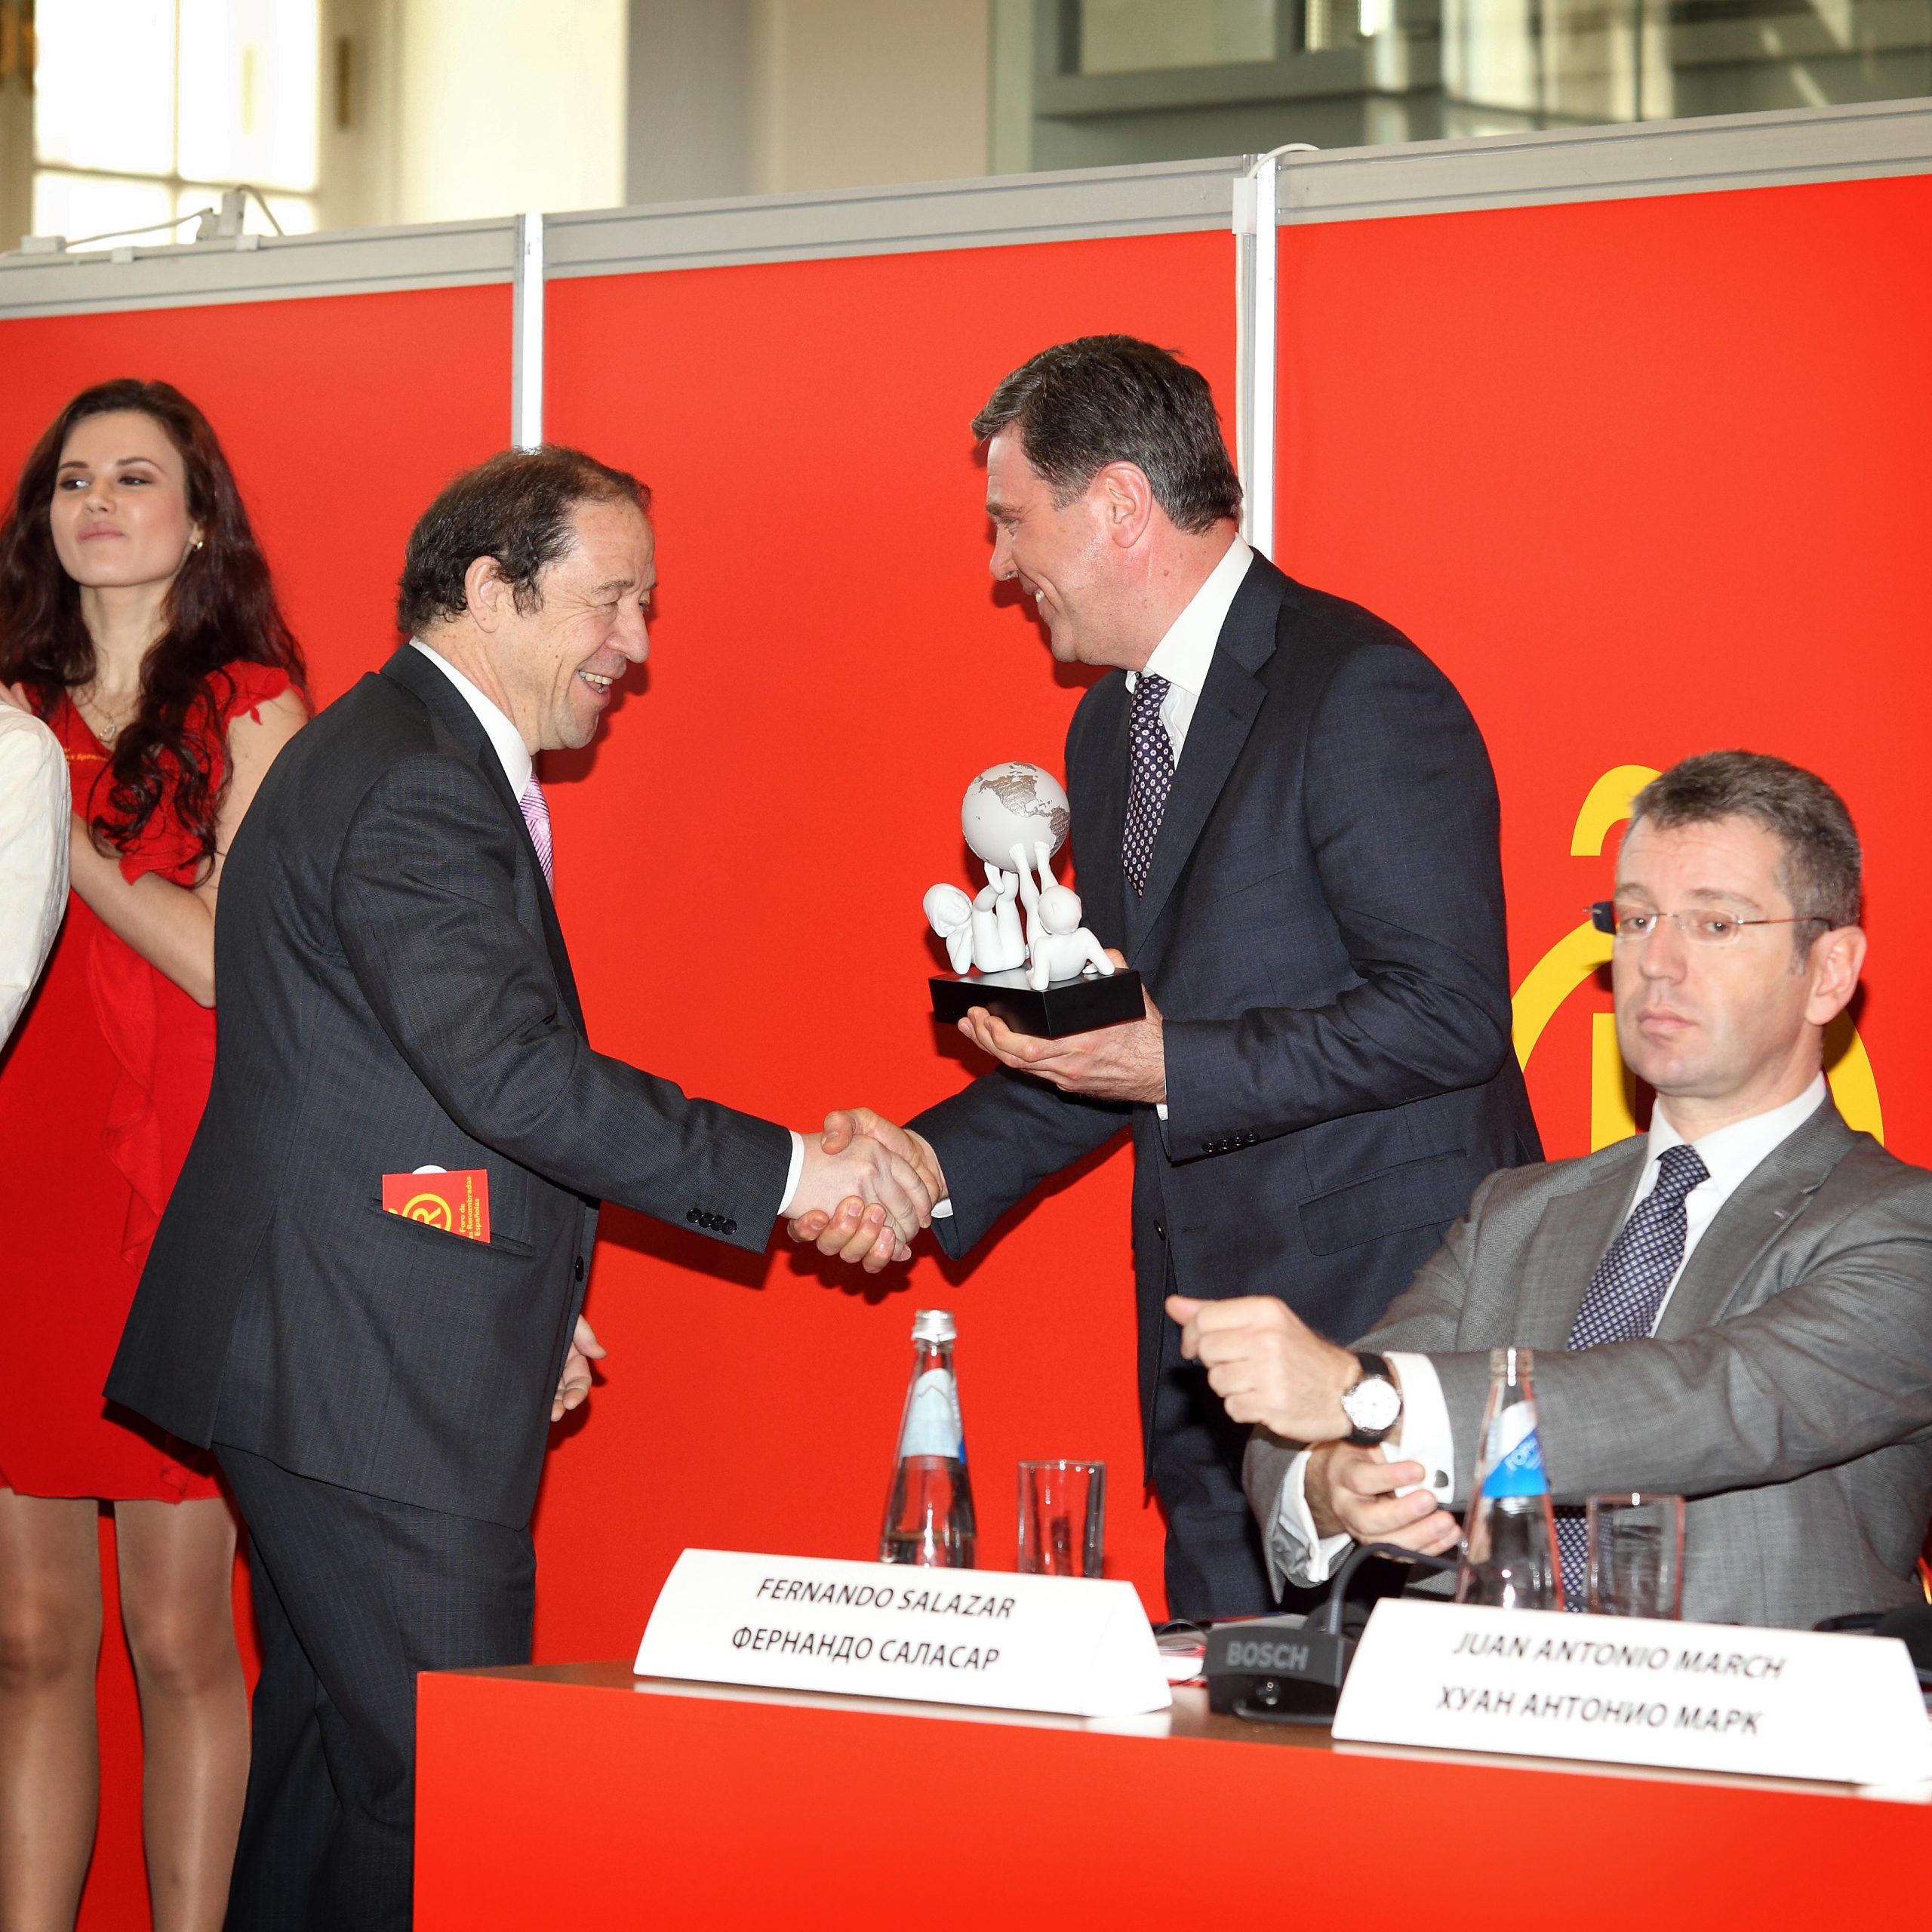 Friends of the Spain Brand and the spanish brands in Russia